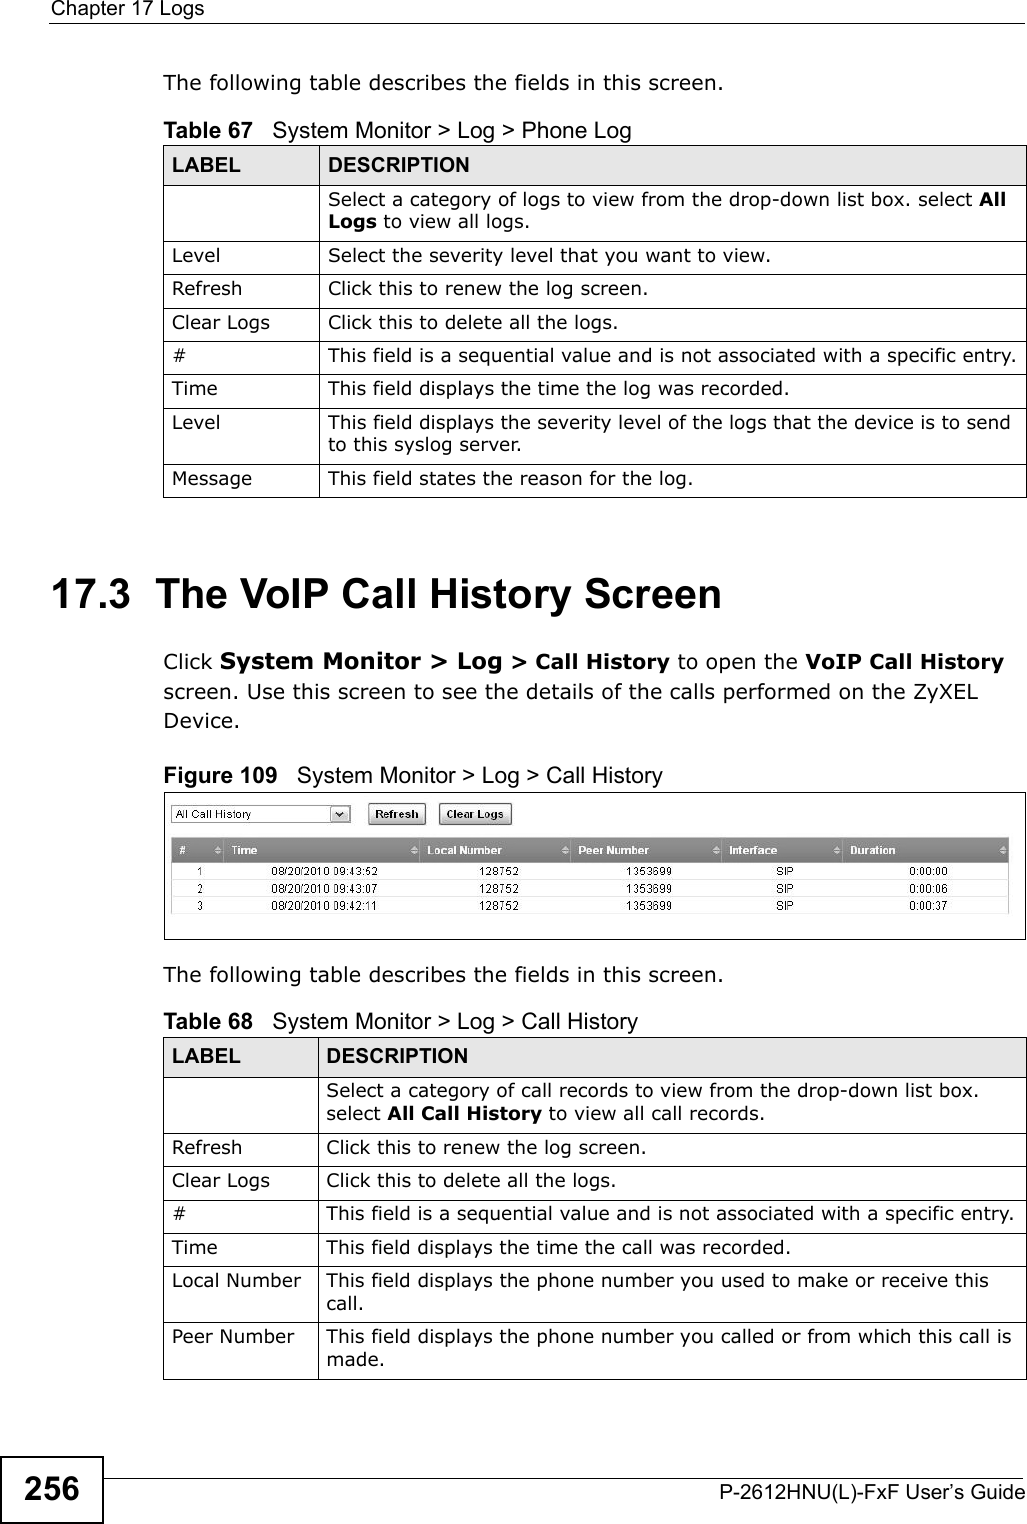 Chapter 17 LogsP-2612HNU(L)-FxF User’s Guide256The following table describes the fields in this screen.   17.3  The VoIP Call History ScreenClick System Monitor &gt; Log &gt; Call History to open the VoIP Call Historyscreen. Use this screen to see the details of the calls performed on the ZyXEL Device. Figure 109   System Monitor &gt; Log &gt; Call HistoryThe following table describes the fields in this screen.Table 67   System Monitor &gt; Log &gt; Phone LogLABEL DESCRIPTIONSelect a category of logs to view from the drop-down list box. select All Logs to view all logs. Level  Select the severity level that you want to view.Refresh Click this to renew the log screen. Clear Logs Click this to delete all the logs. # This field is a sequential value and is not associated with a specific entry.Time  This field displays the time the log was recorded. Level This field displays the severity level of the logs that the device is to send to this syslog server.Message This field states the reason for the log.Table 68   System Monitor &gt; Log &gt; Call HistoryLABEL DESCRIPTIONSelect a category of call records to view from the drop-down list box. select All Call History to view all call records. Refresh Click this to renew the log screen. Clear Logs Click this to delete all the logs. # This field is a sequential value and is not associated with a specific entry.Time This field displays the time the call was recorded. Local Number This field displays the phone number you used to make or receive this call.Peer Number This field displays the phone number you called or from which this call is made.